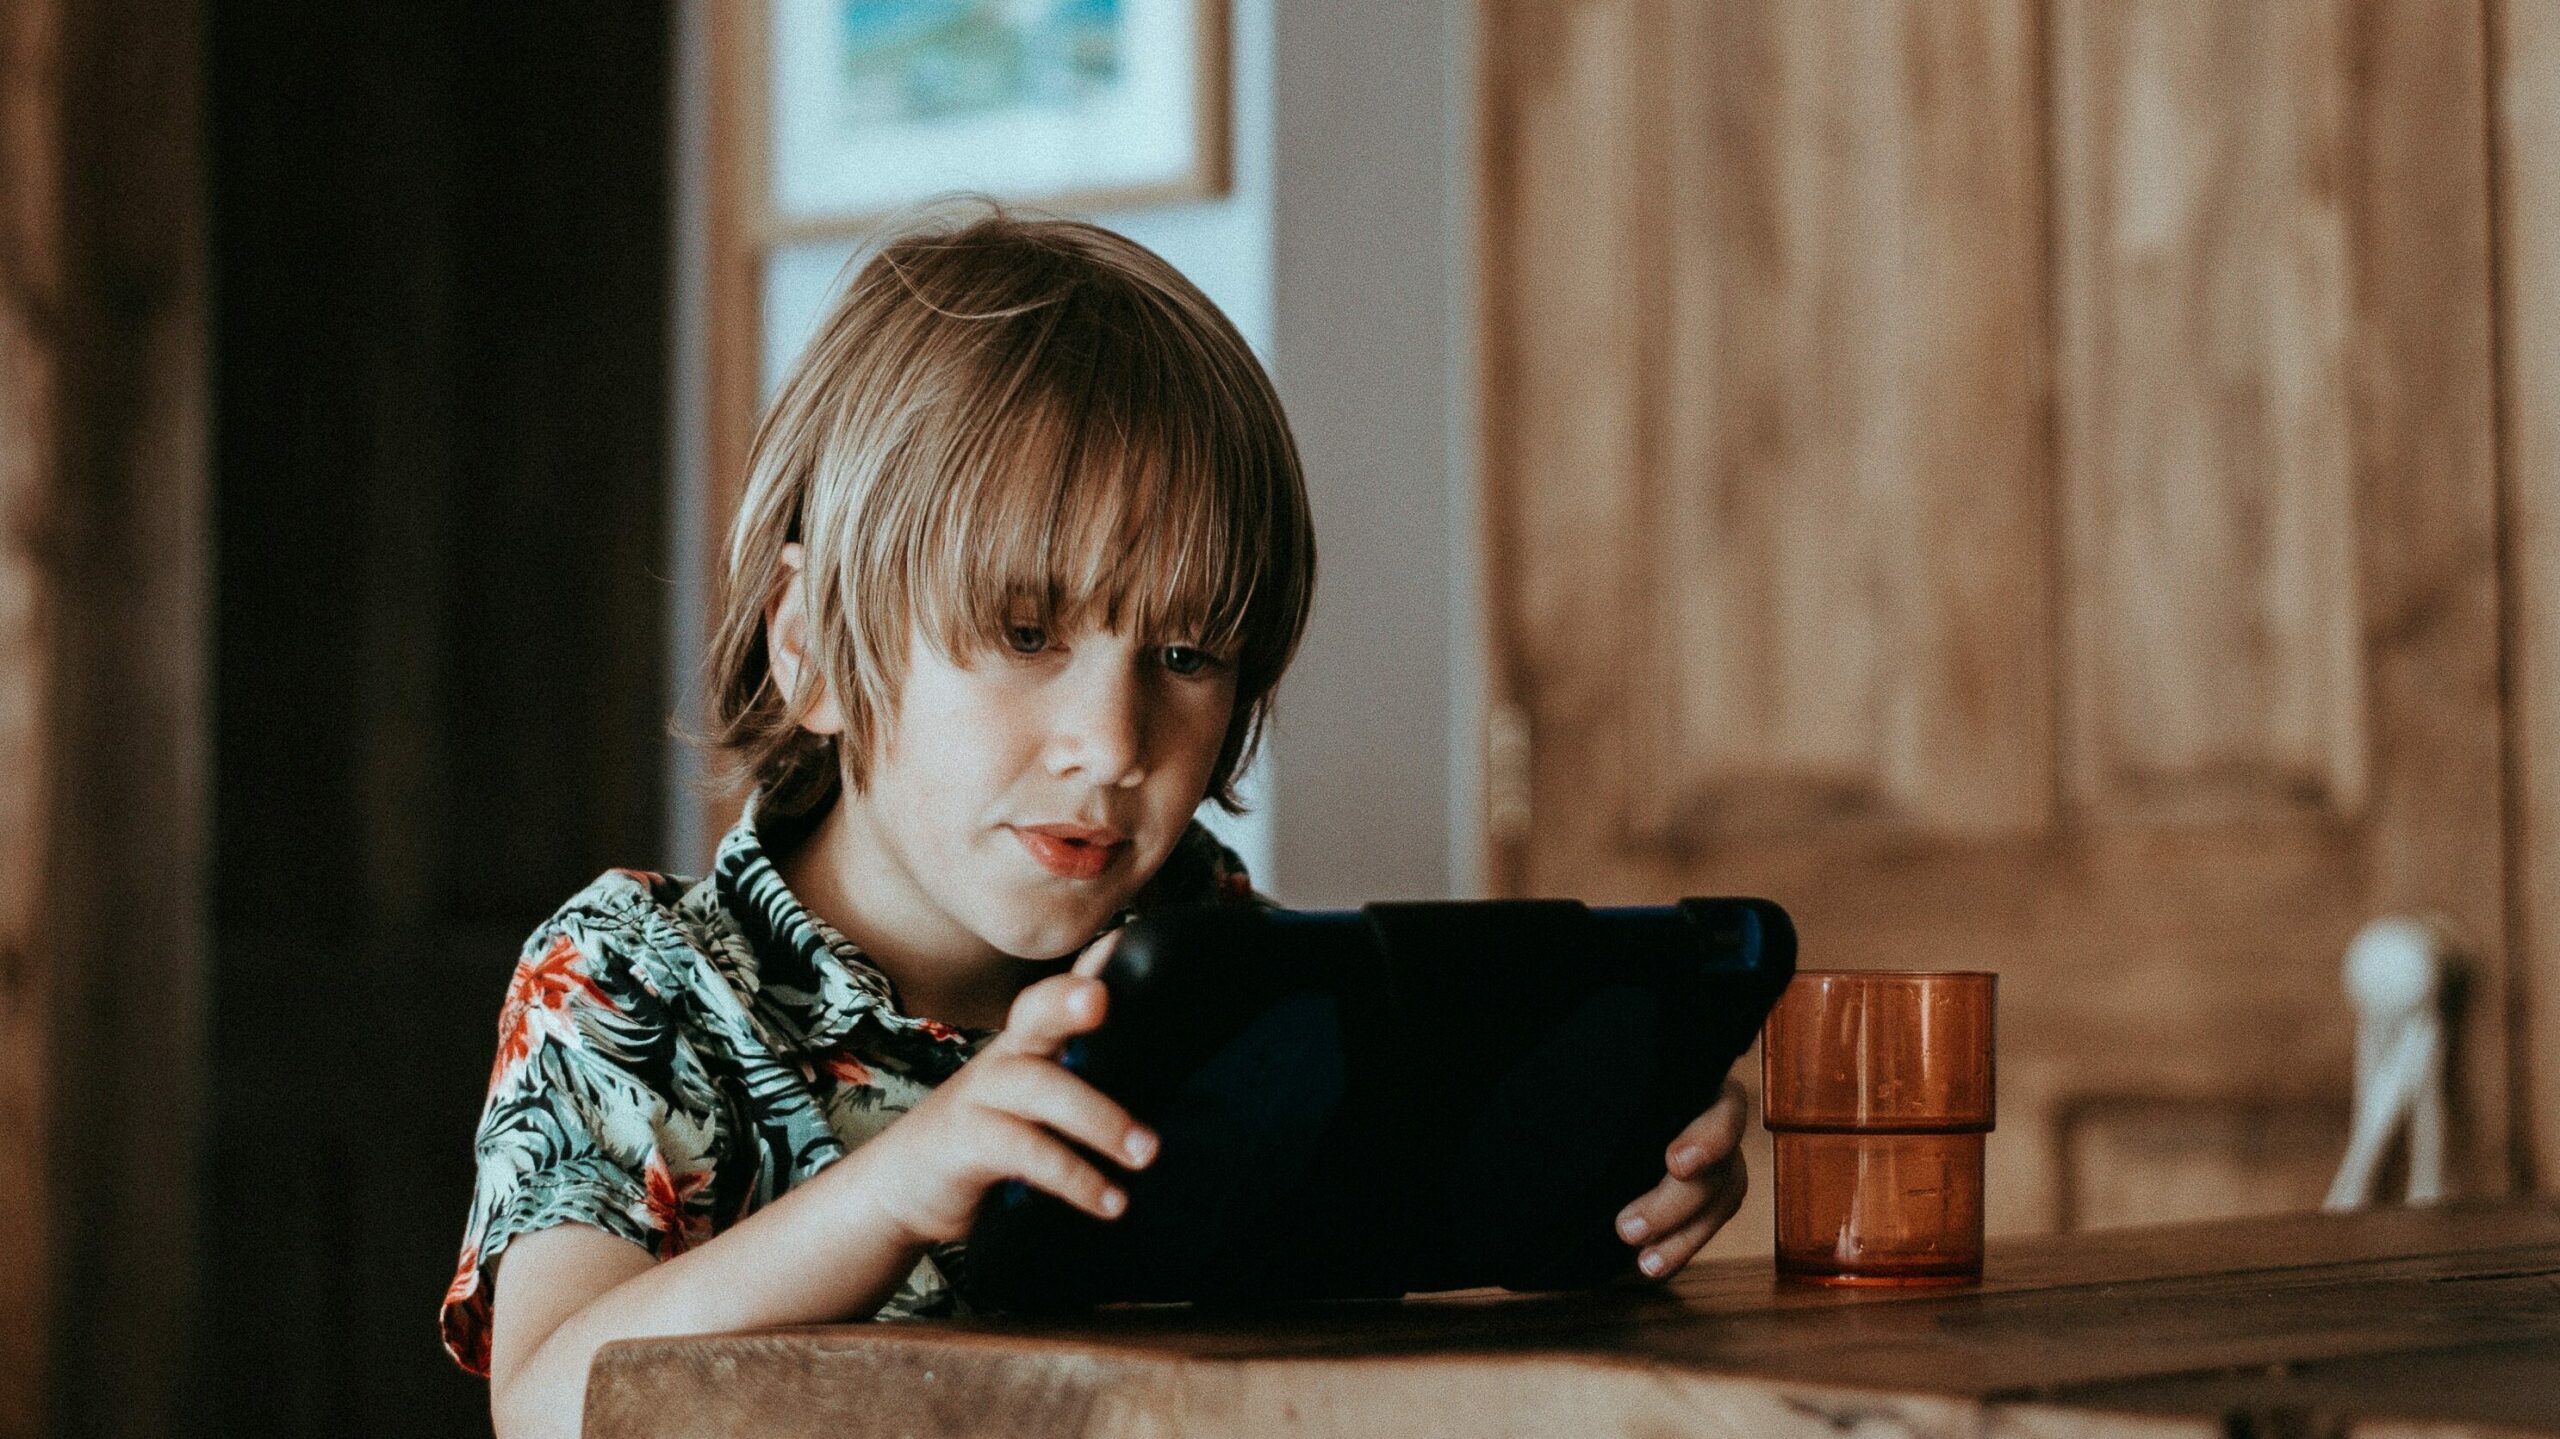 A young boy wearing a tropical print shirt, is absorbed in a handheld gaming device at a wooden table. This image highlights the effects of kids' screen time, portraying a child's deep concentration on digital entertainment, which is part of the ongoing discussion about technology's impact on youth.